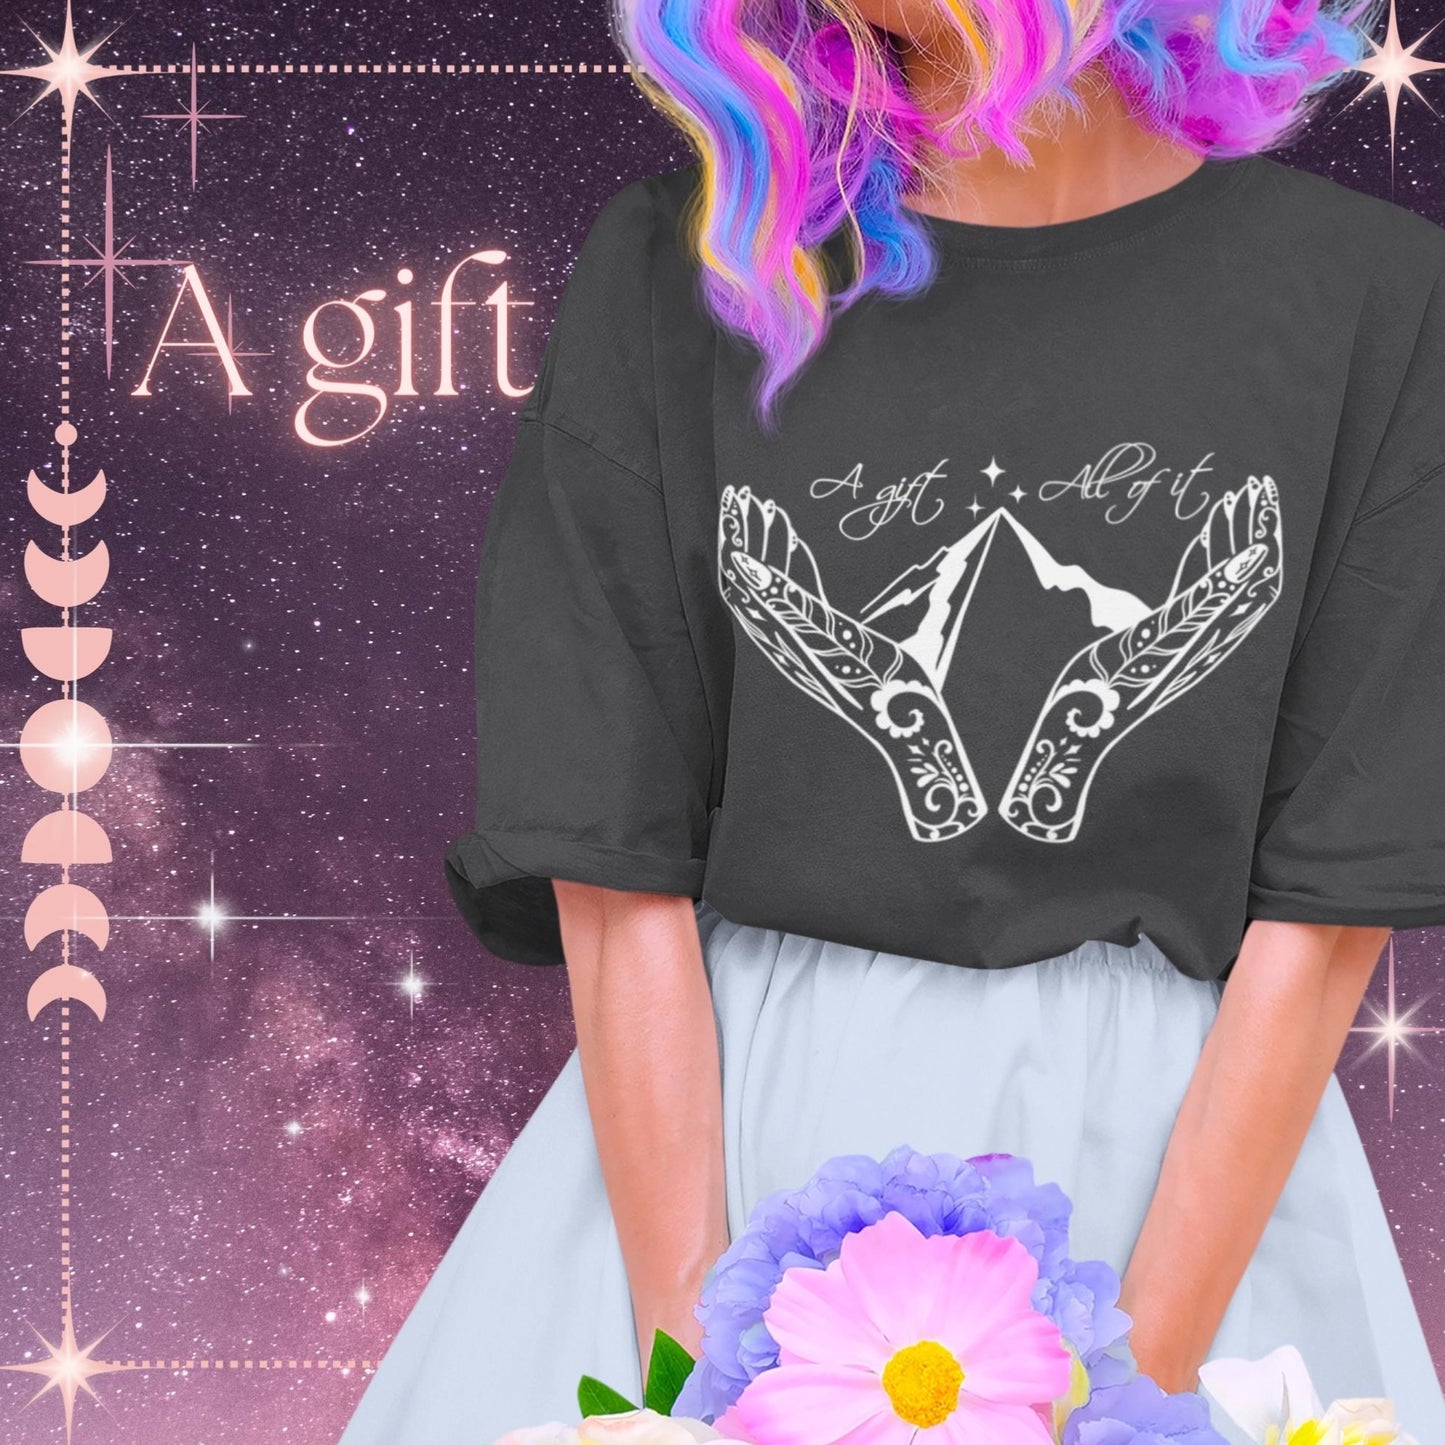 ACOTAR Shirt - A Gift, All of it - Feyre's Hands Holding Ramiel T-Shirt